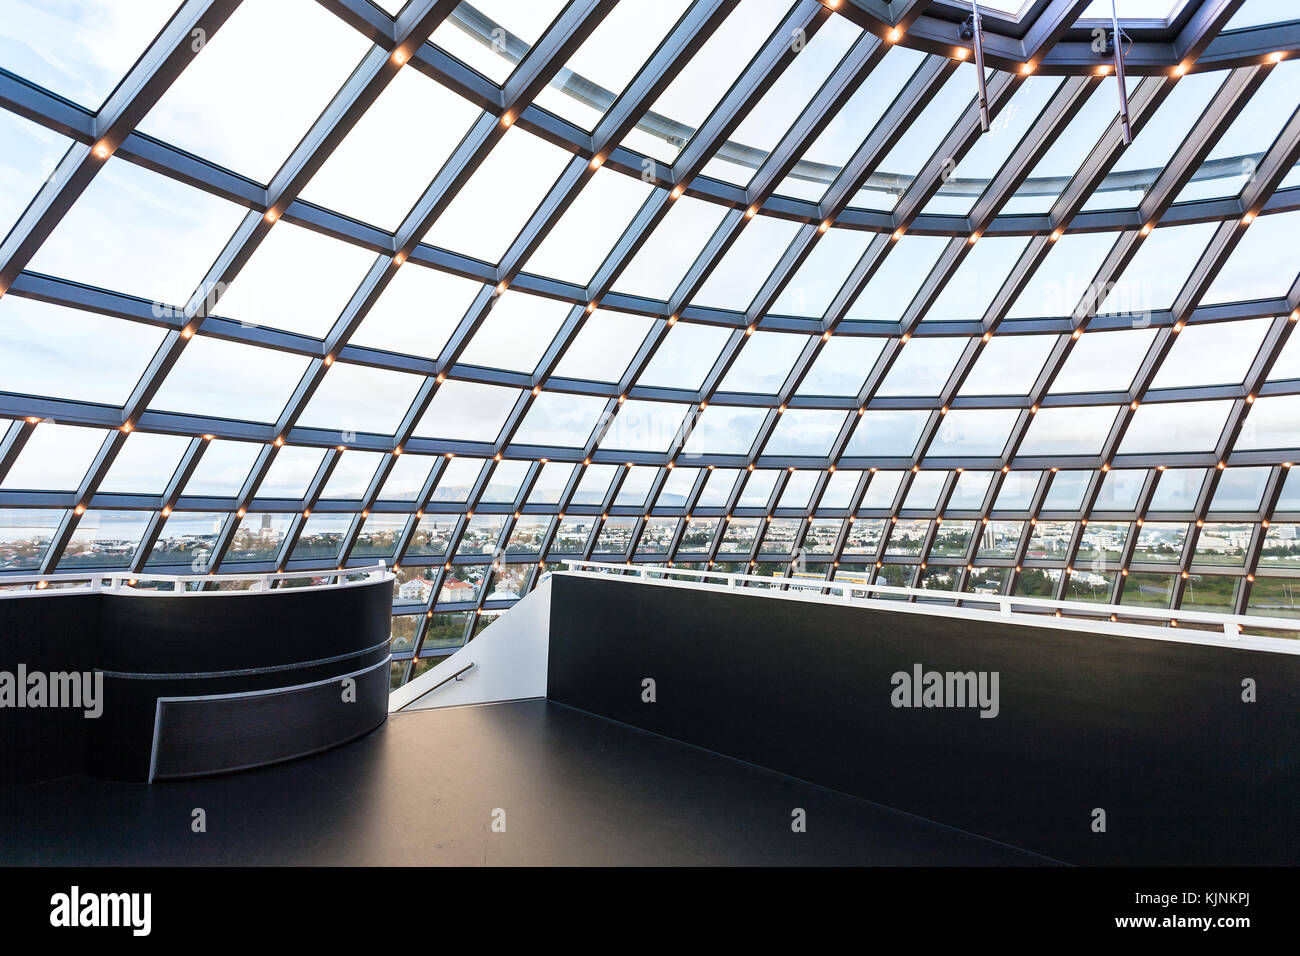 REYKJAVIC, ICELAND - SEPTEMBER 7, 2017: inside glass dome on Observation Deck of Perlan Museum in Reykjavik city in evening. The Perlan Museum of Wond Stock Photo